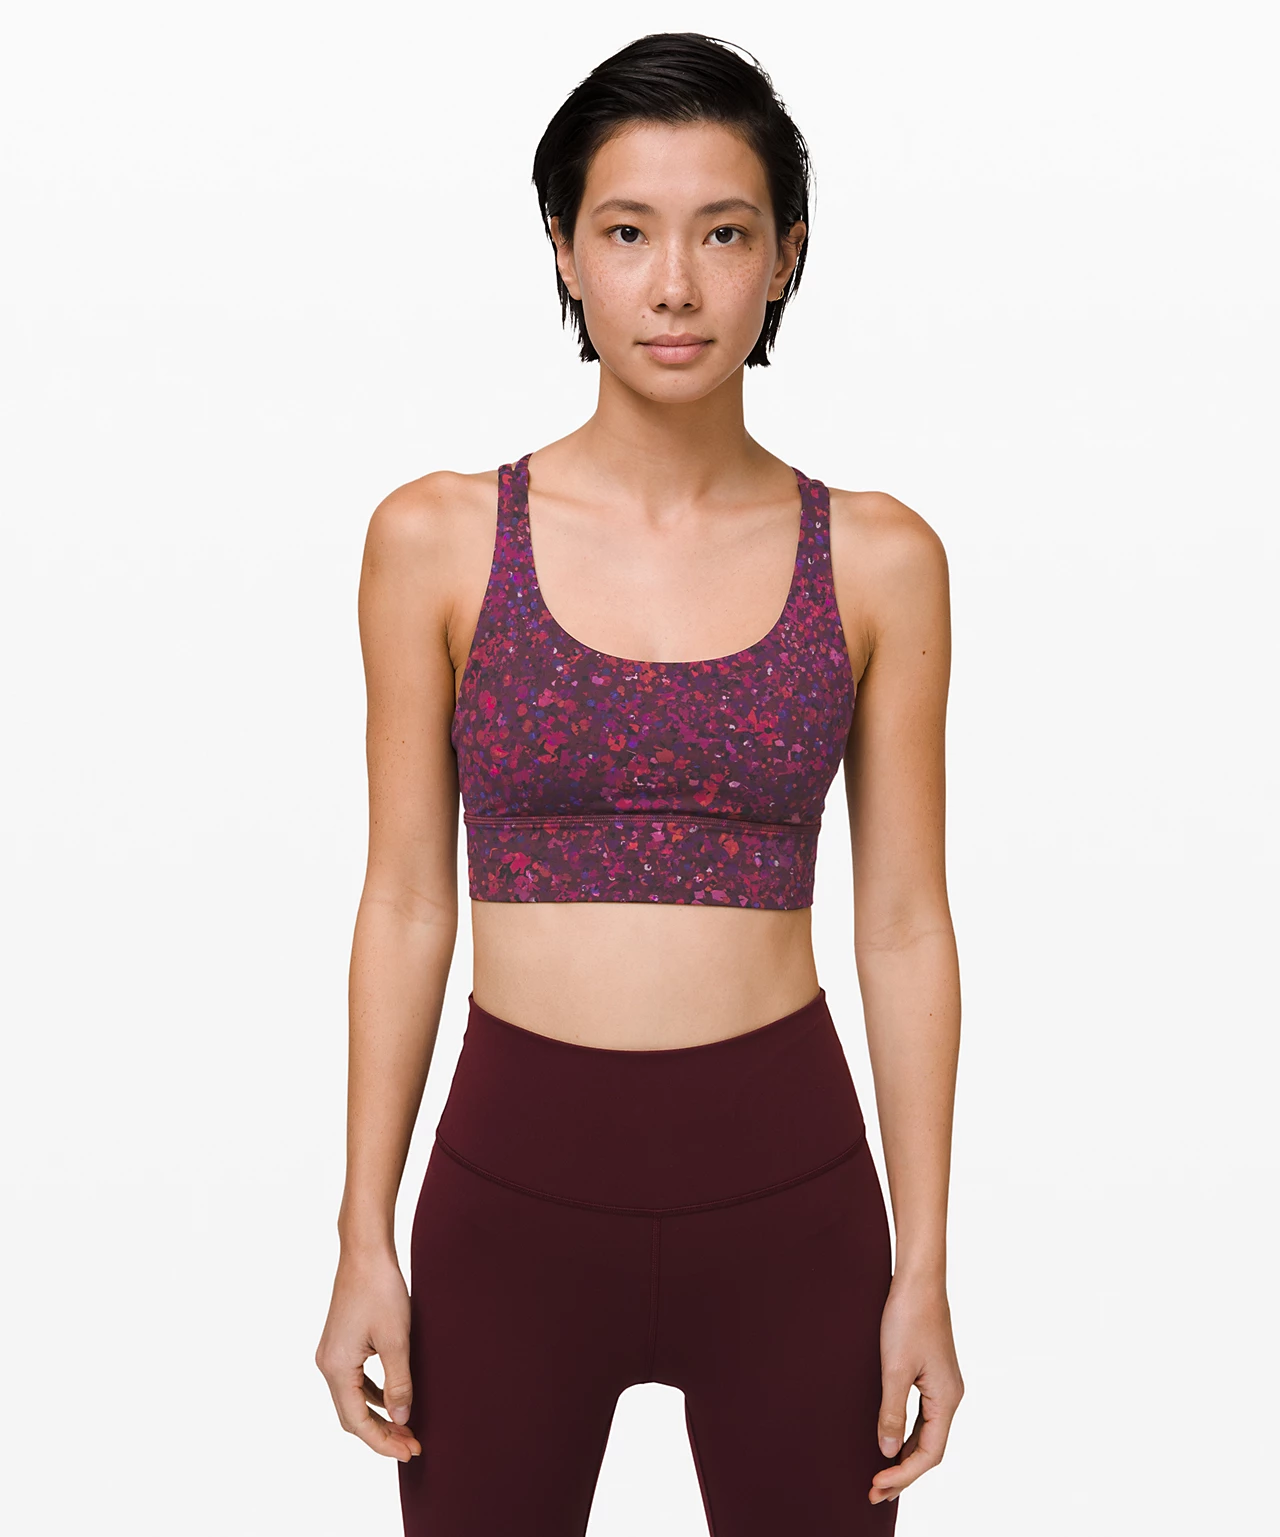 Could we be getting #NewYear items too from @lululemon ?! DARK RED is